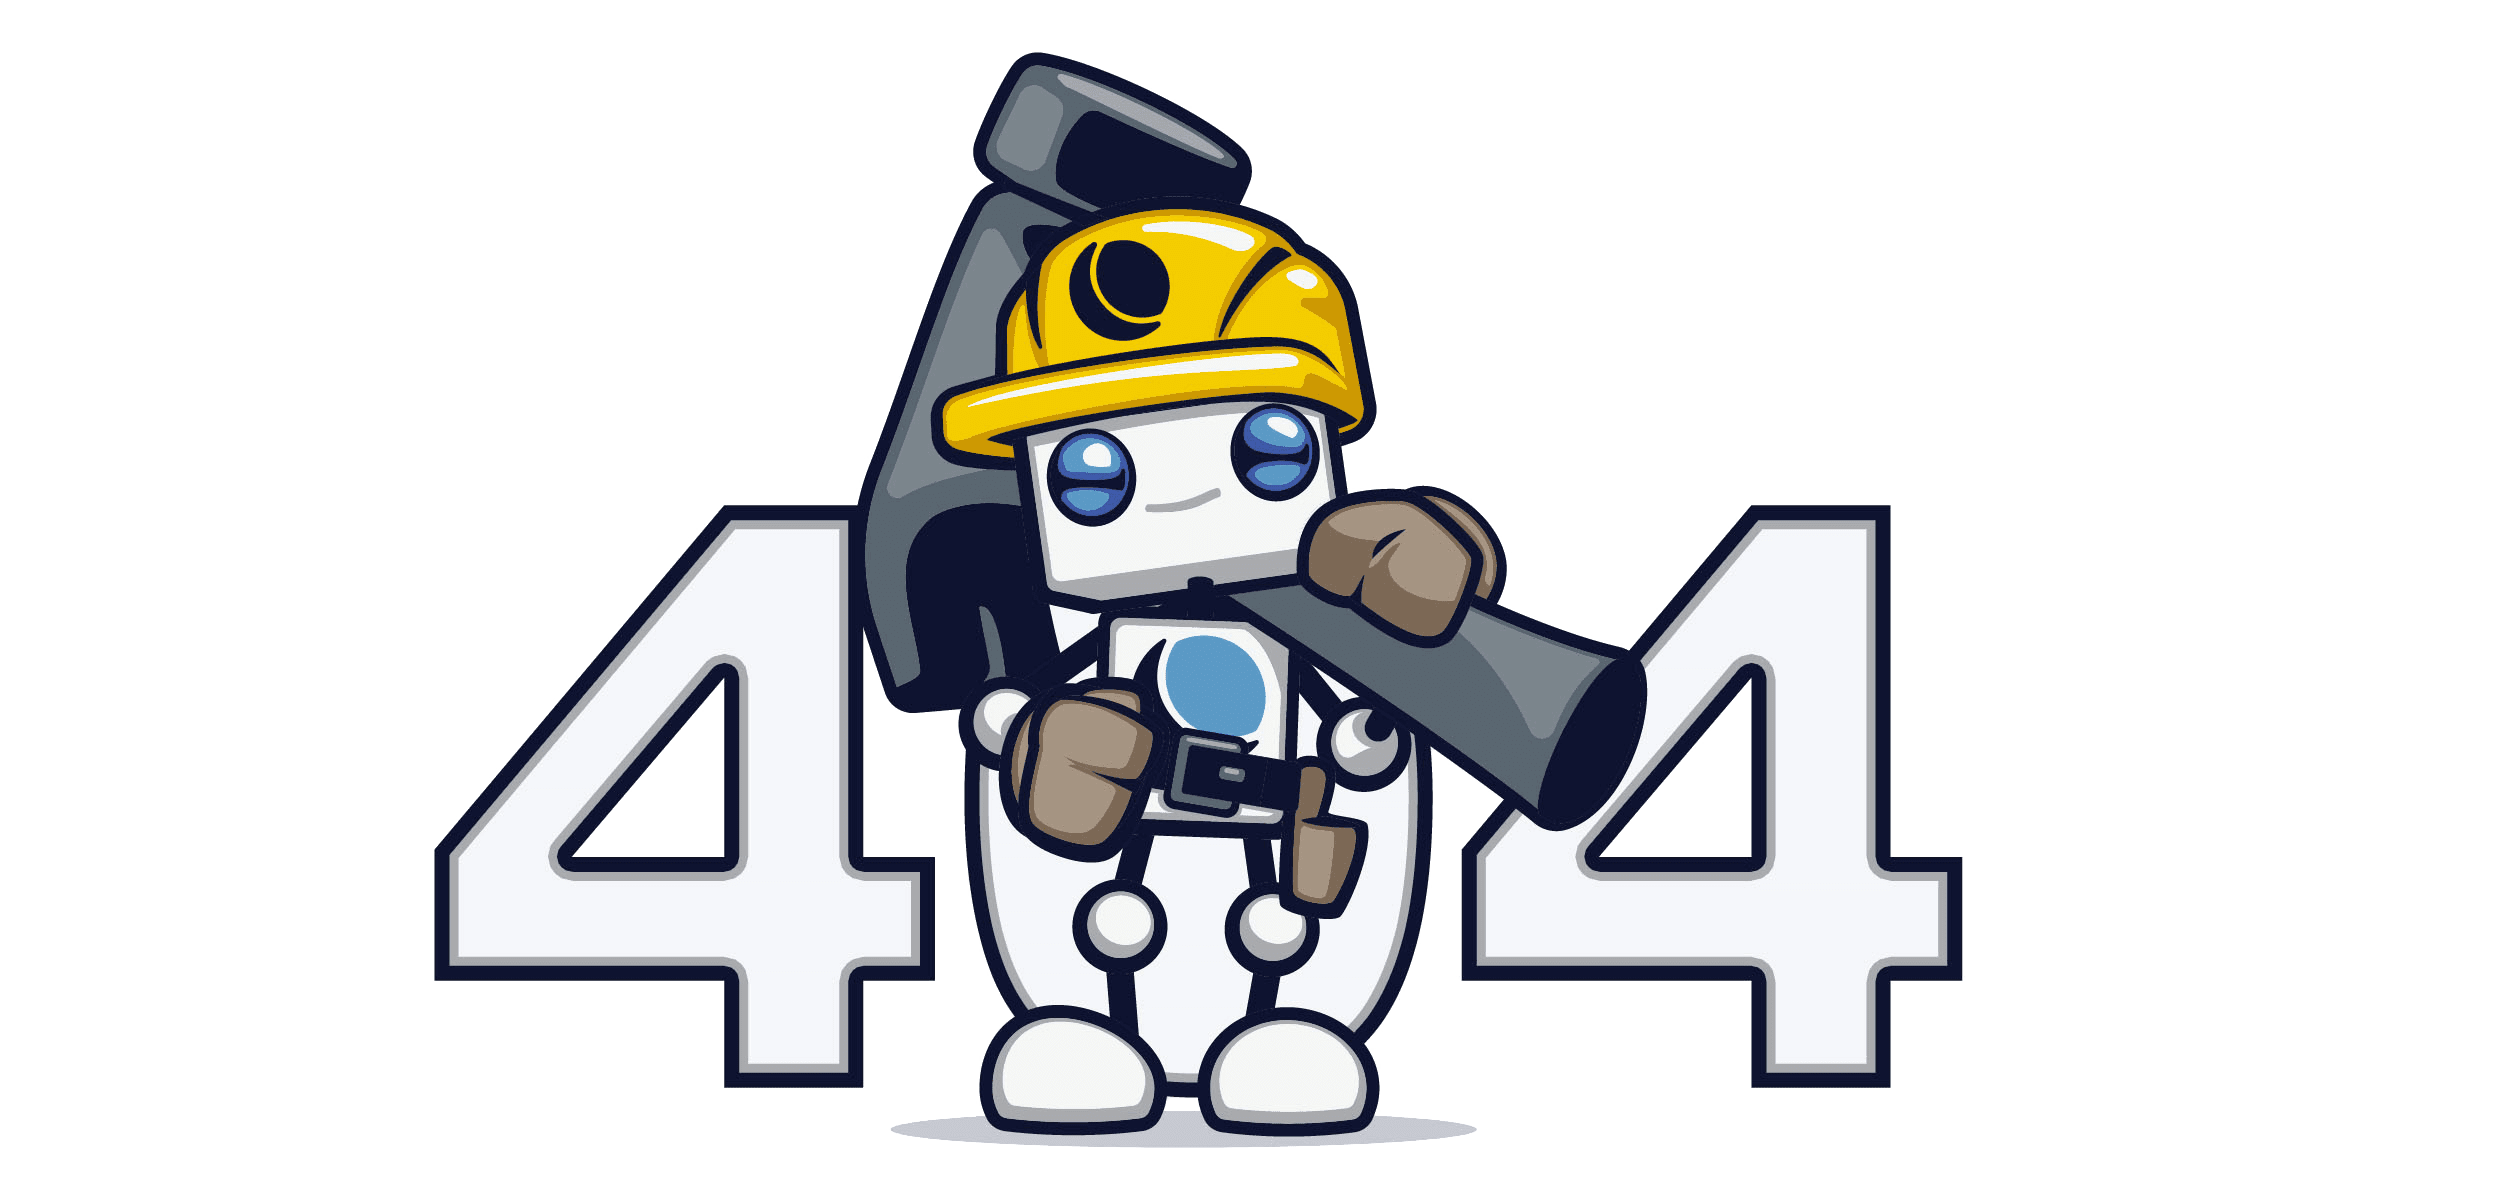 DreamHost robot showing a 404 icon.